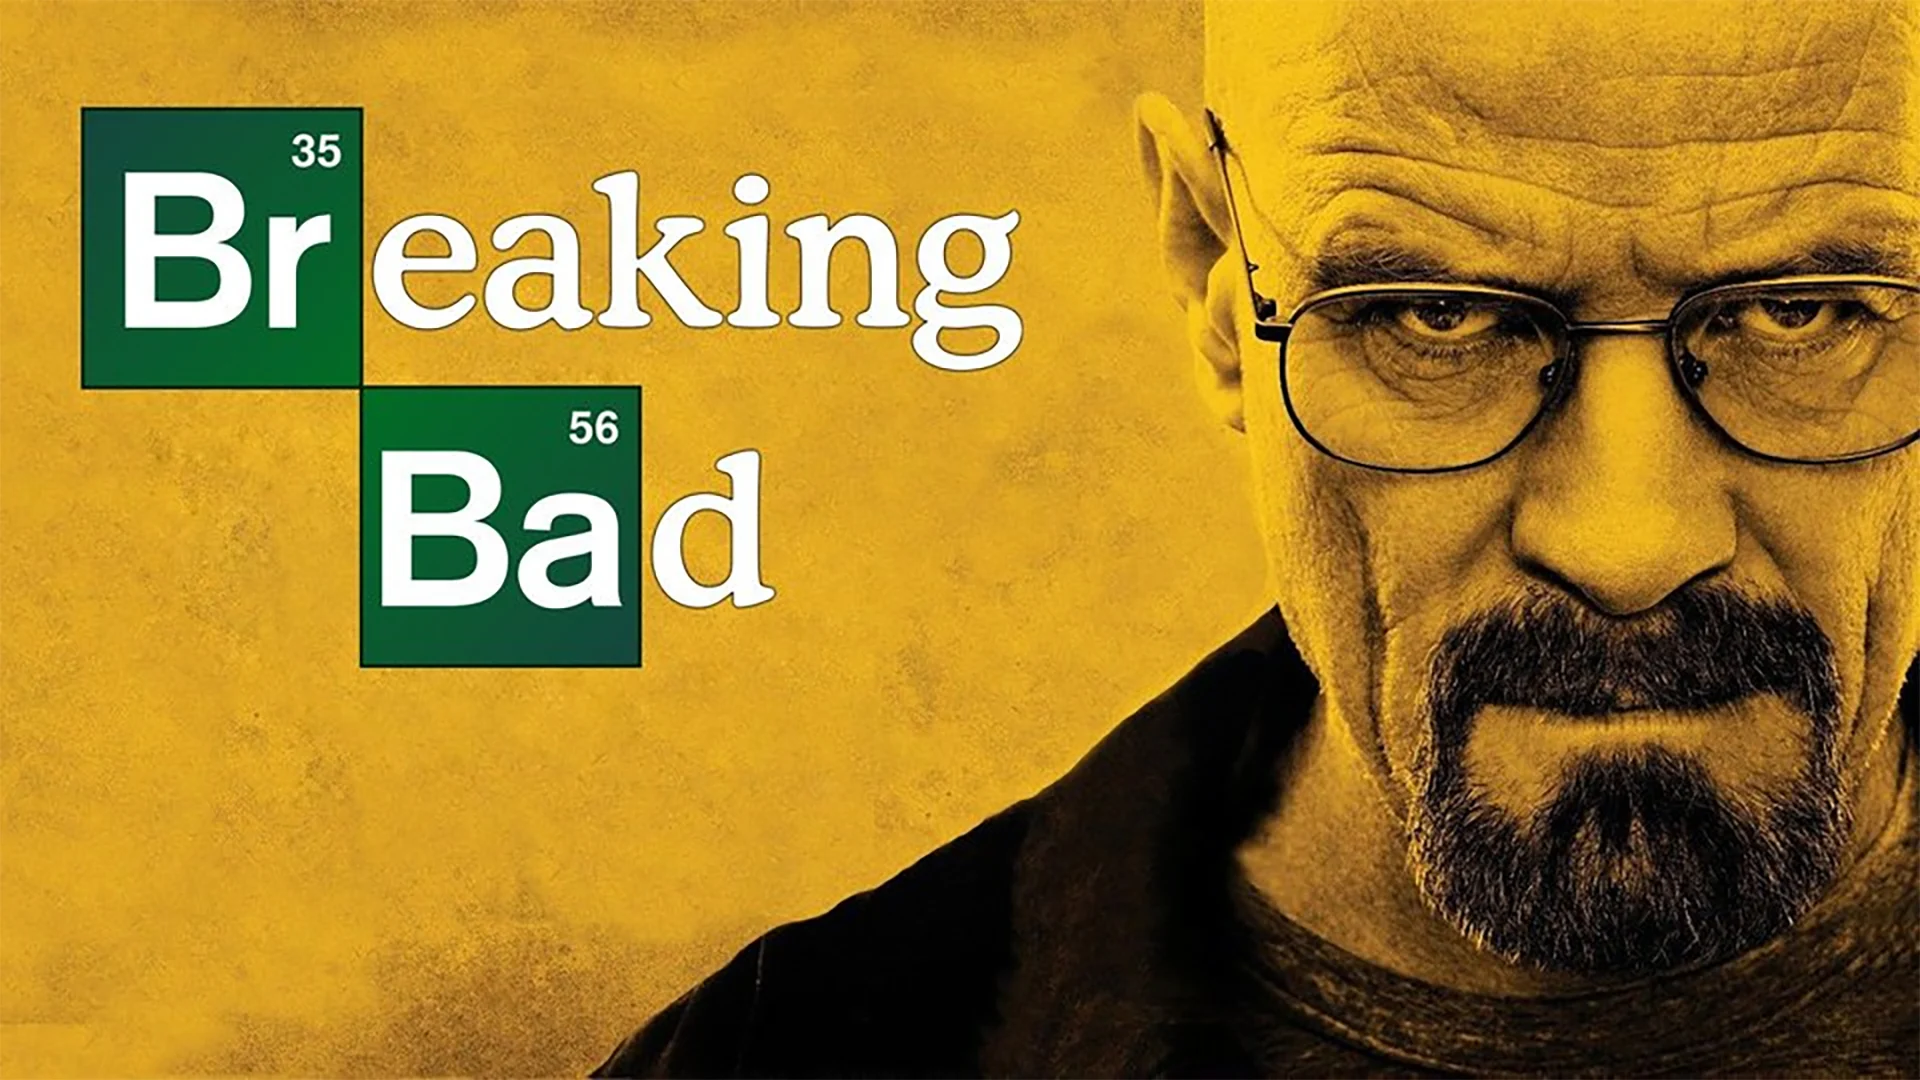 Breaking Bad "PlayStation Game" Created by Fan Gamer Digest